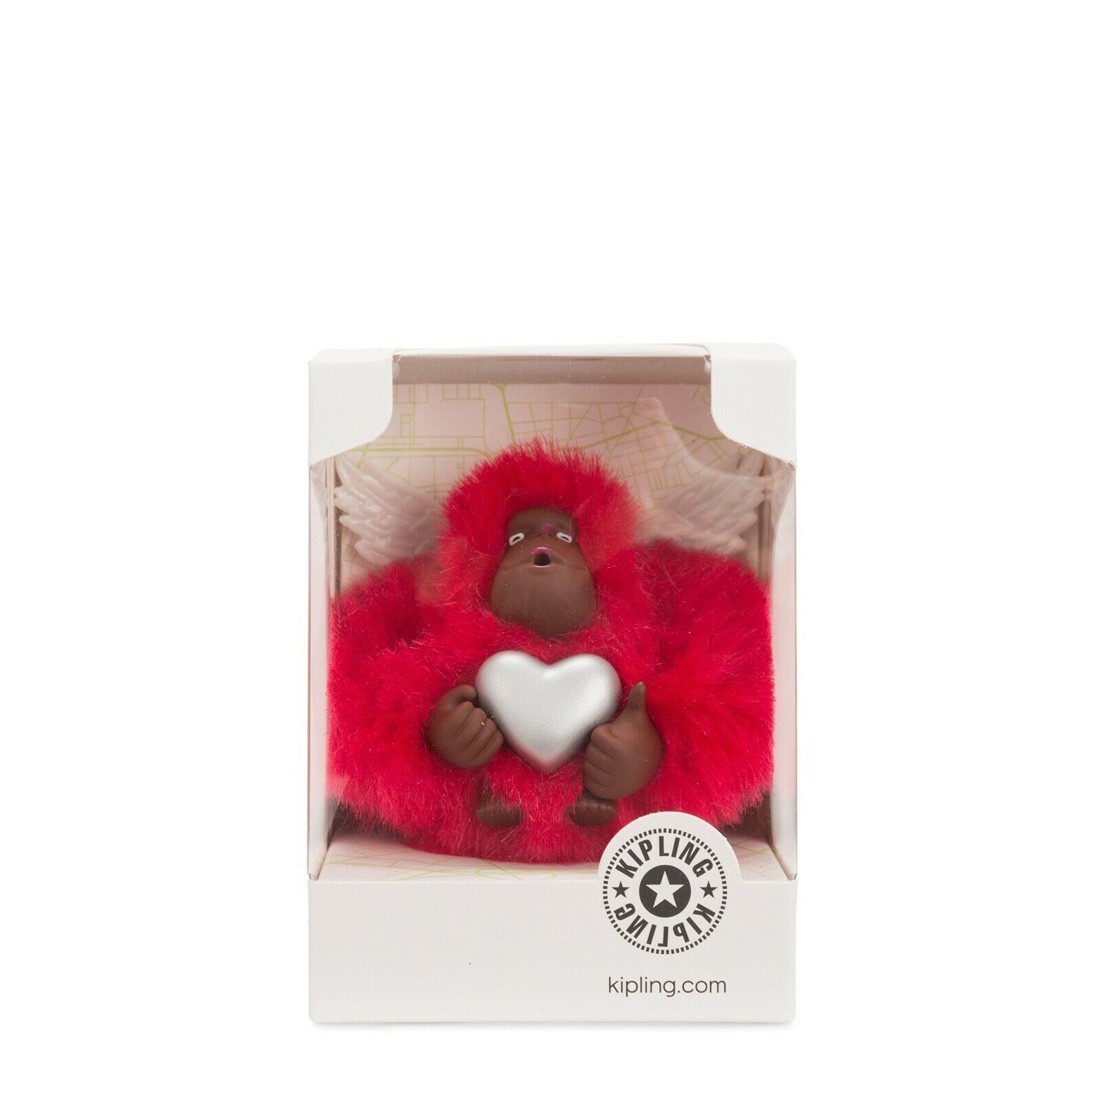 Shop Kipling CUPID MONKEY Collector Cupid Kipling Monkey Keychain - Kipling,  delivered to your home | TheOutfit